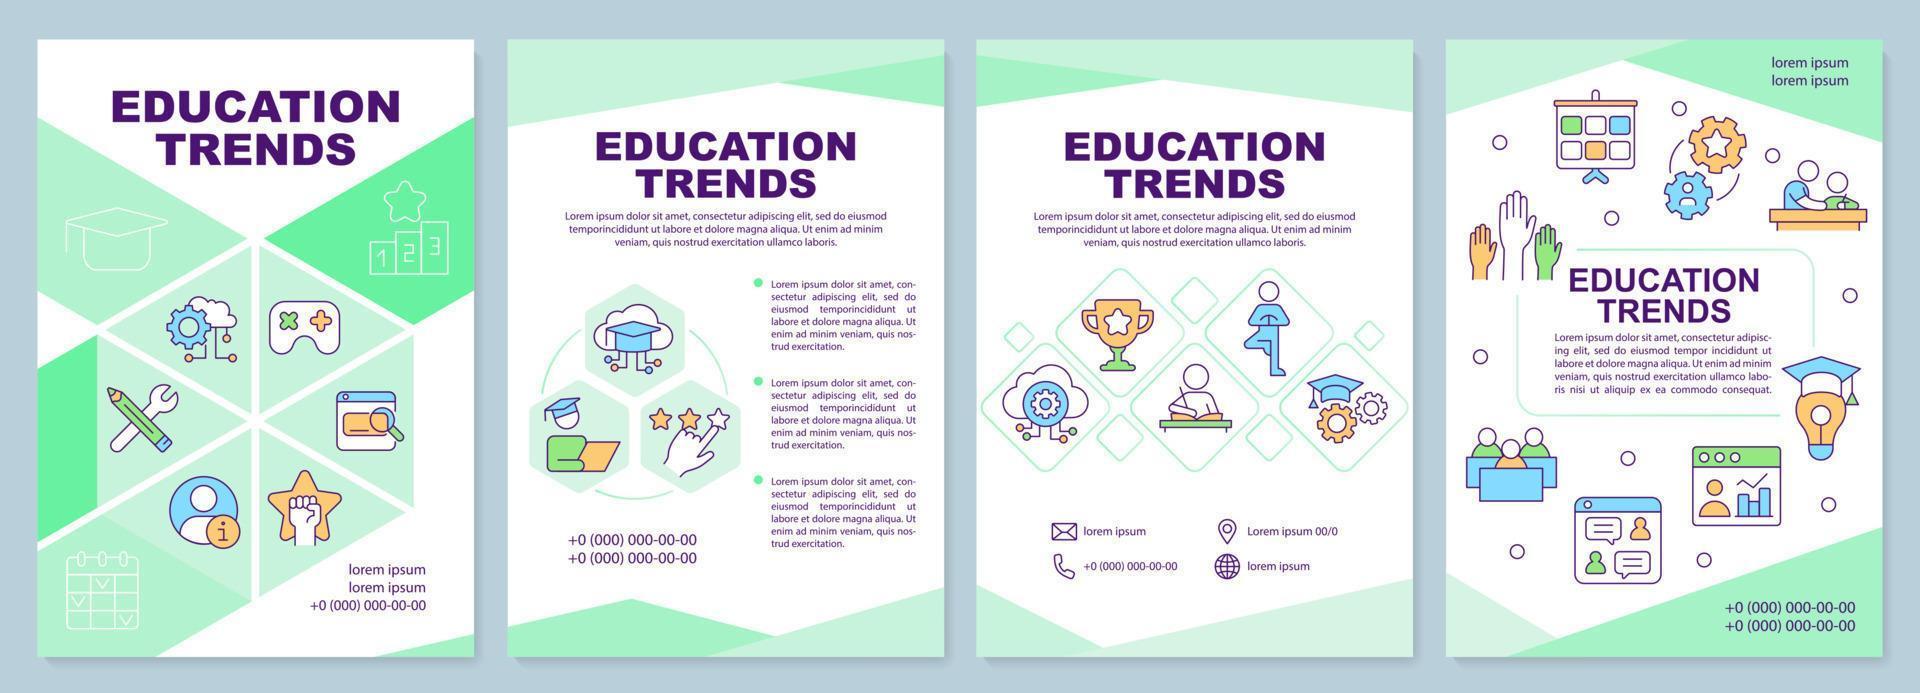 Education trends green brochure template. Learning innovations. Leaflet design with linear icons. 4 vector layouts for presentation, annual reports.